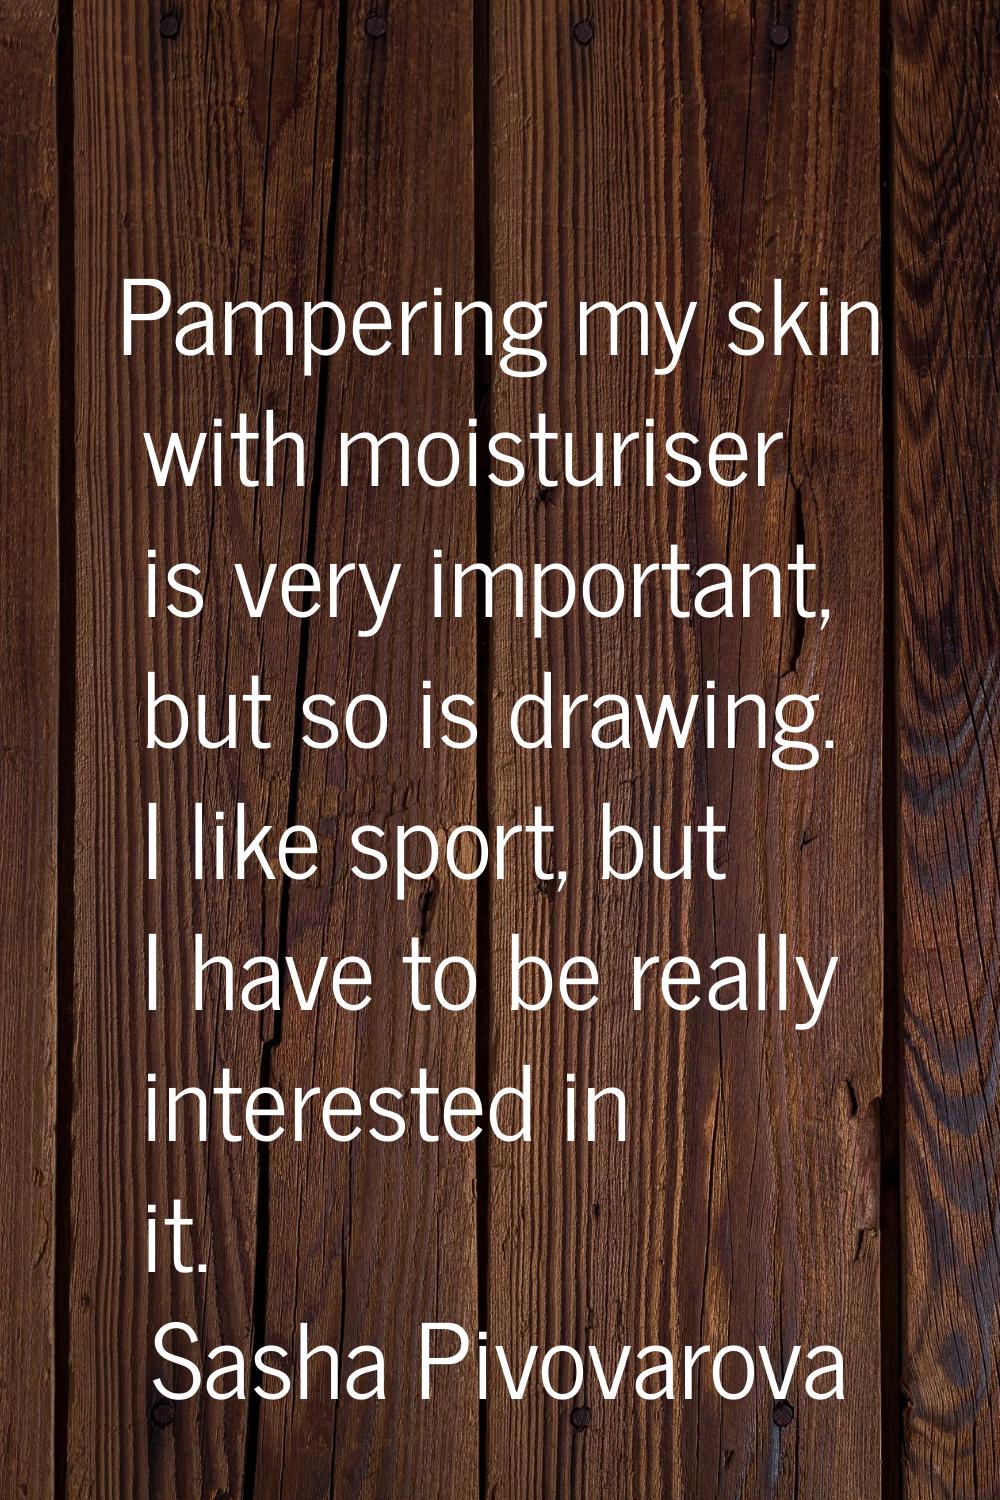 Pampering my skin with moisturiser is very important, but so is drawing. I like sport, but I have t